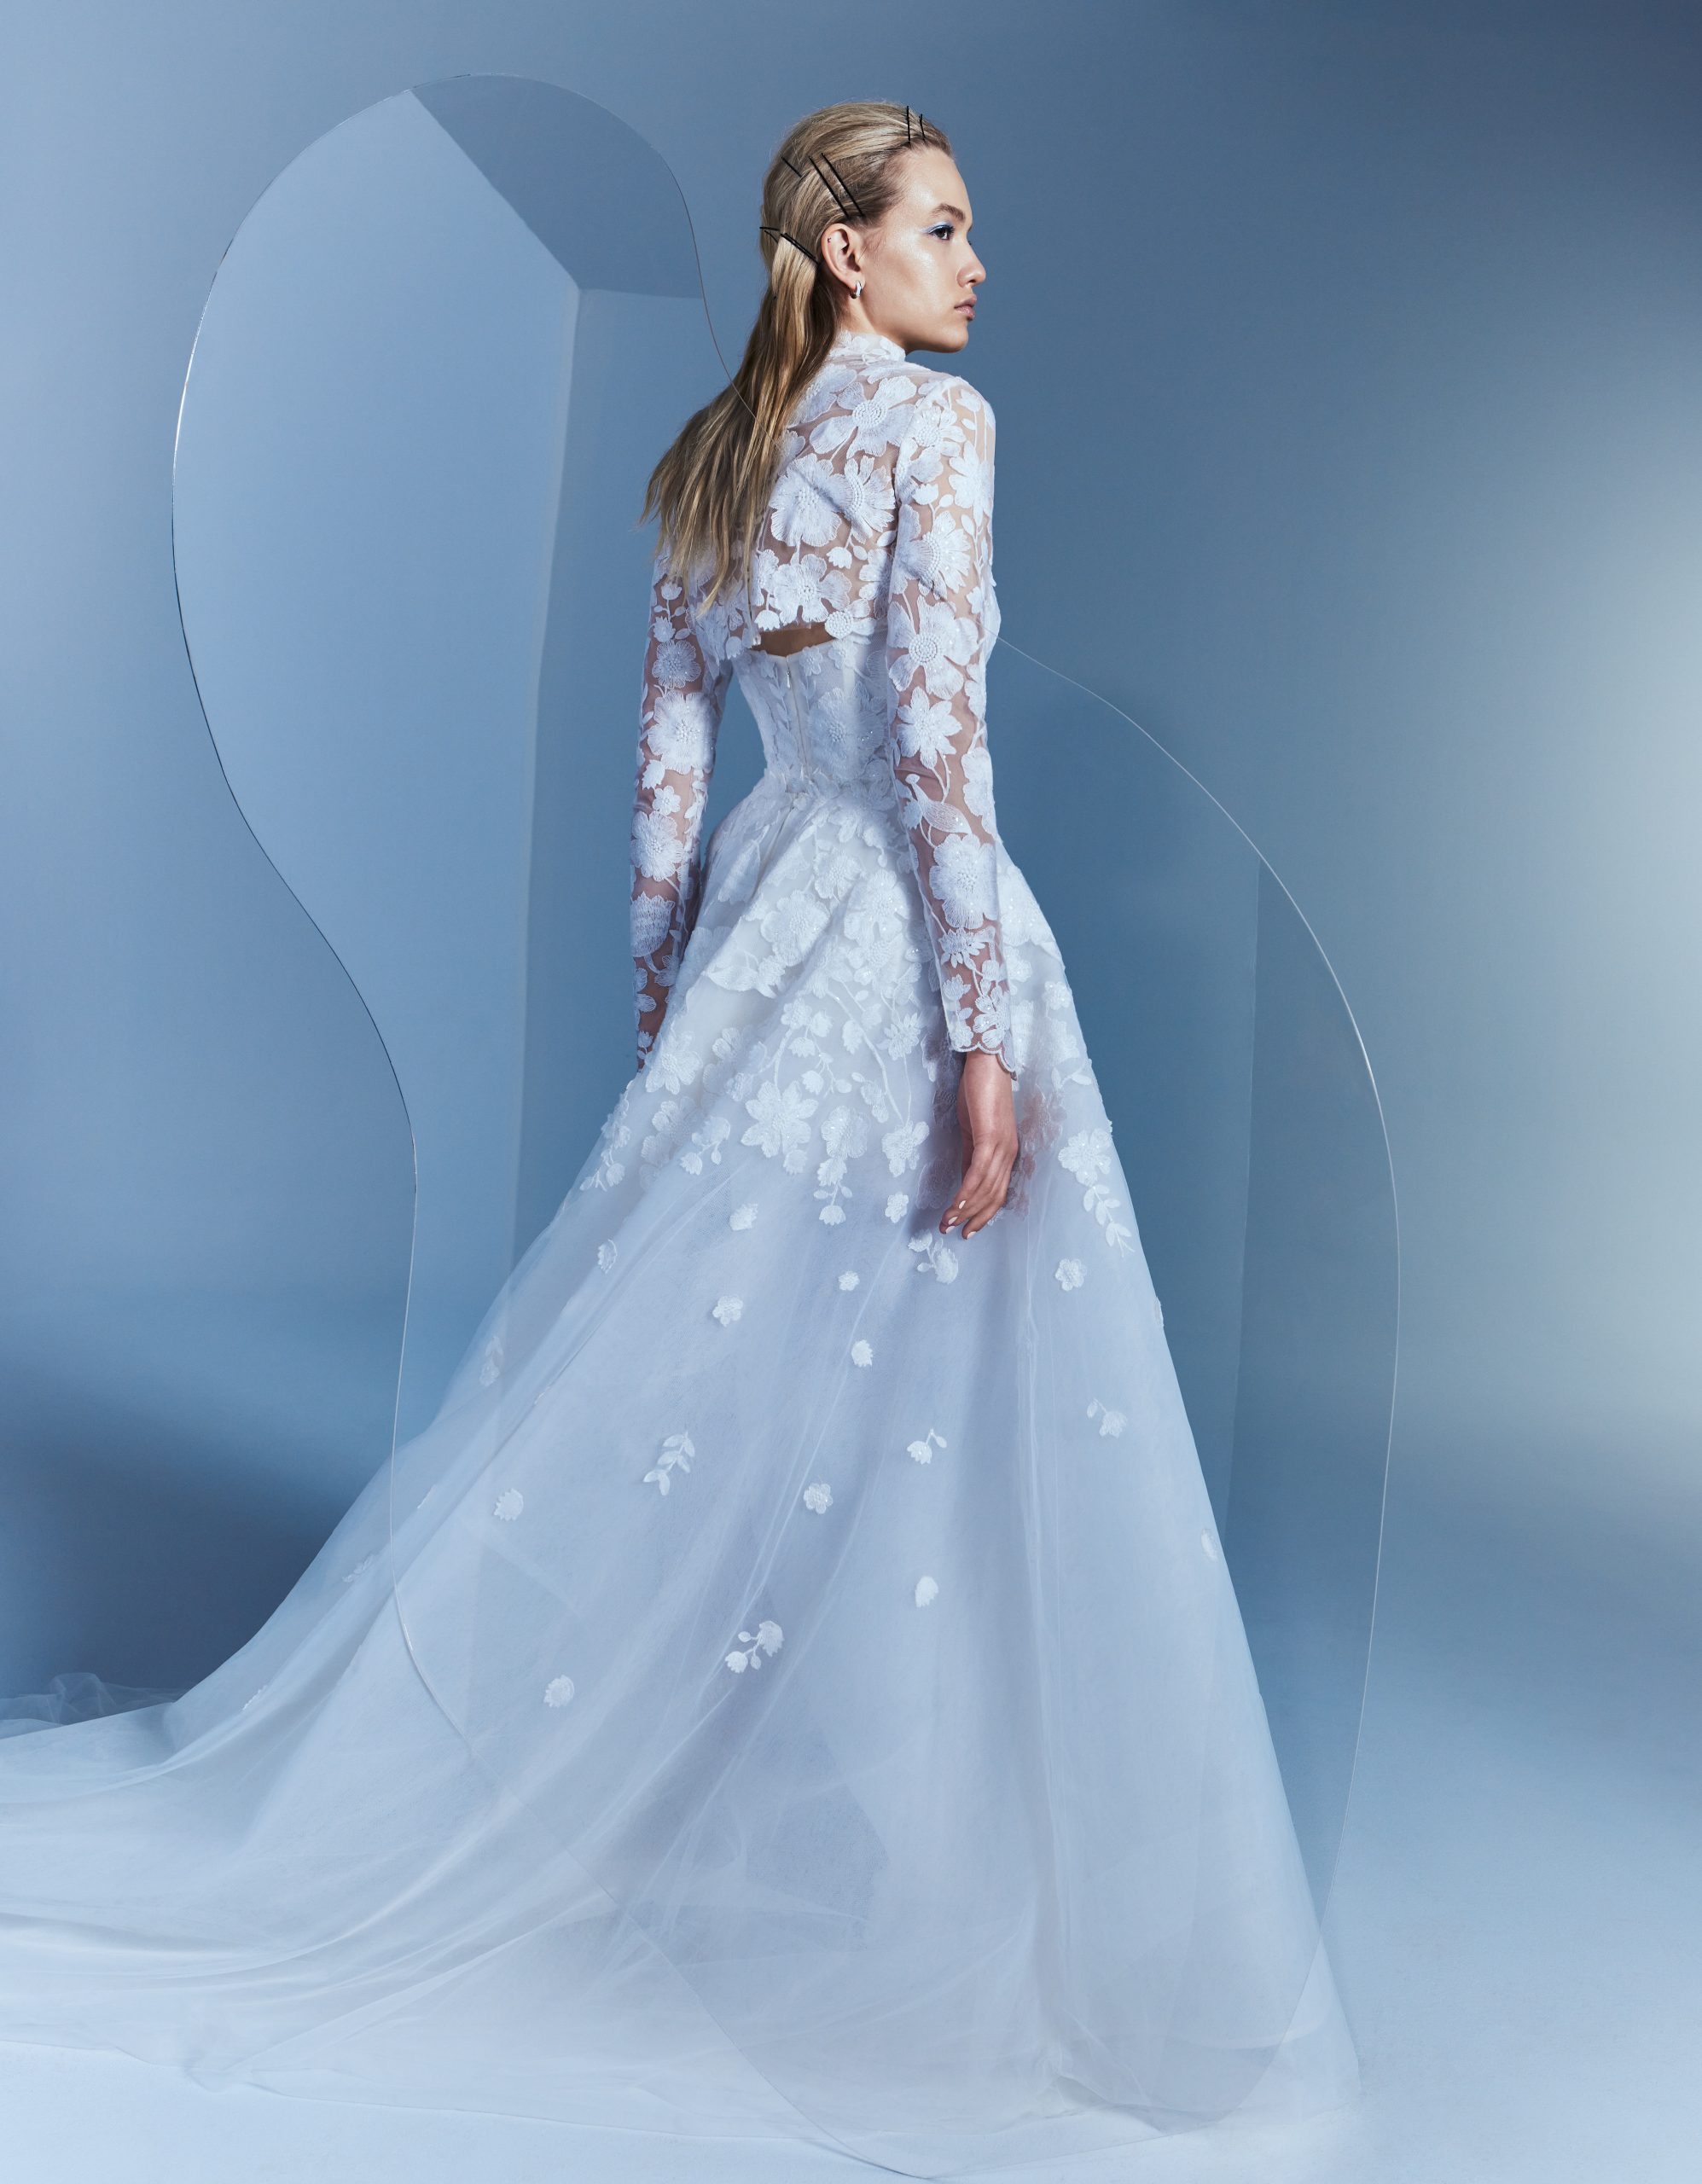 Romantic Convertible High-Necked Long Sleeve Gown | Kleinfeld Bridal